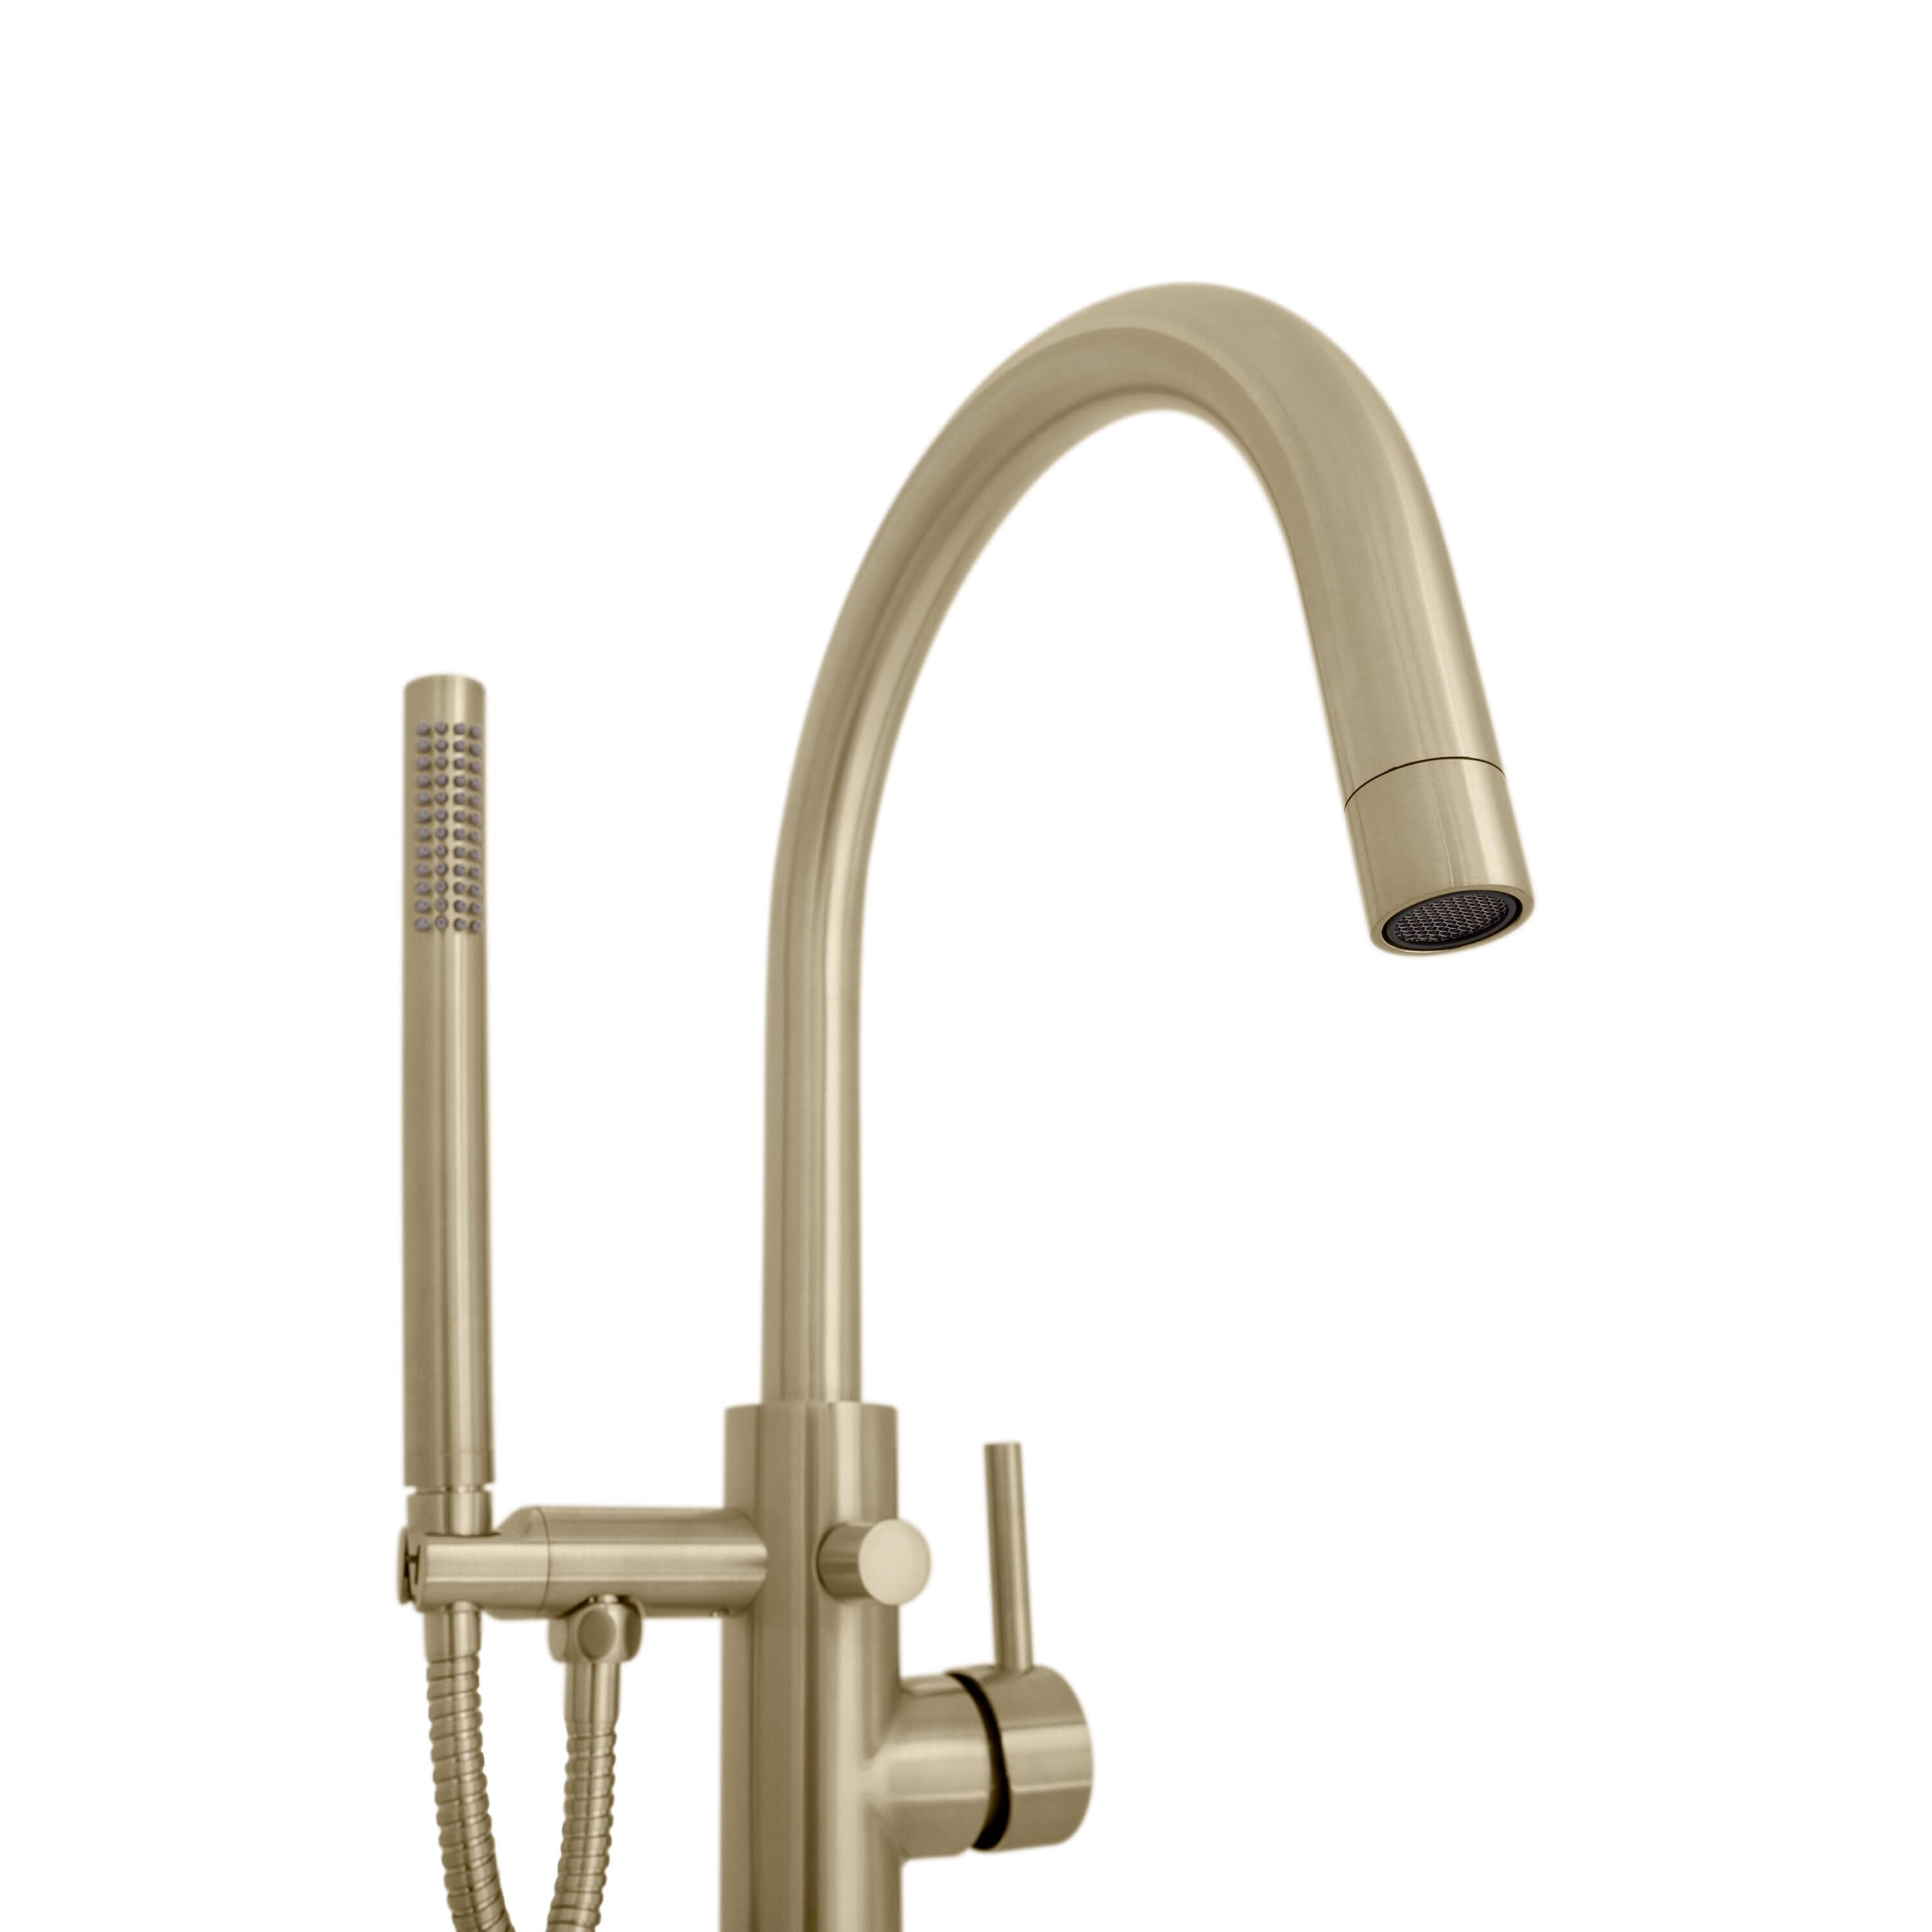 ZLINE Emerald Bay Bath Tub Filler in Champagne Bronze faucet and handle detail